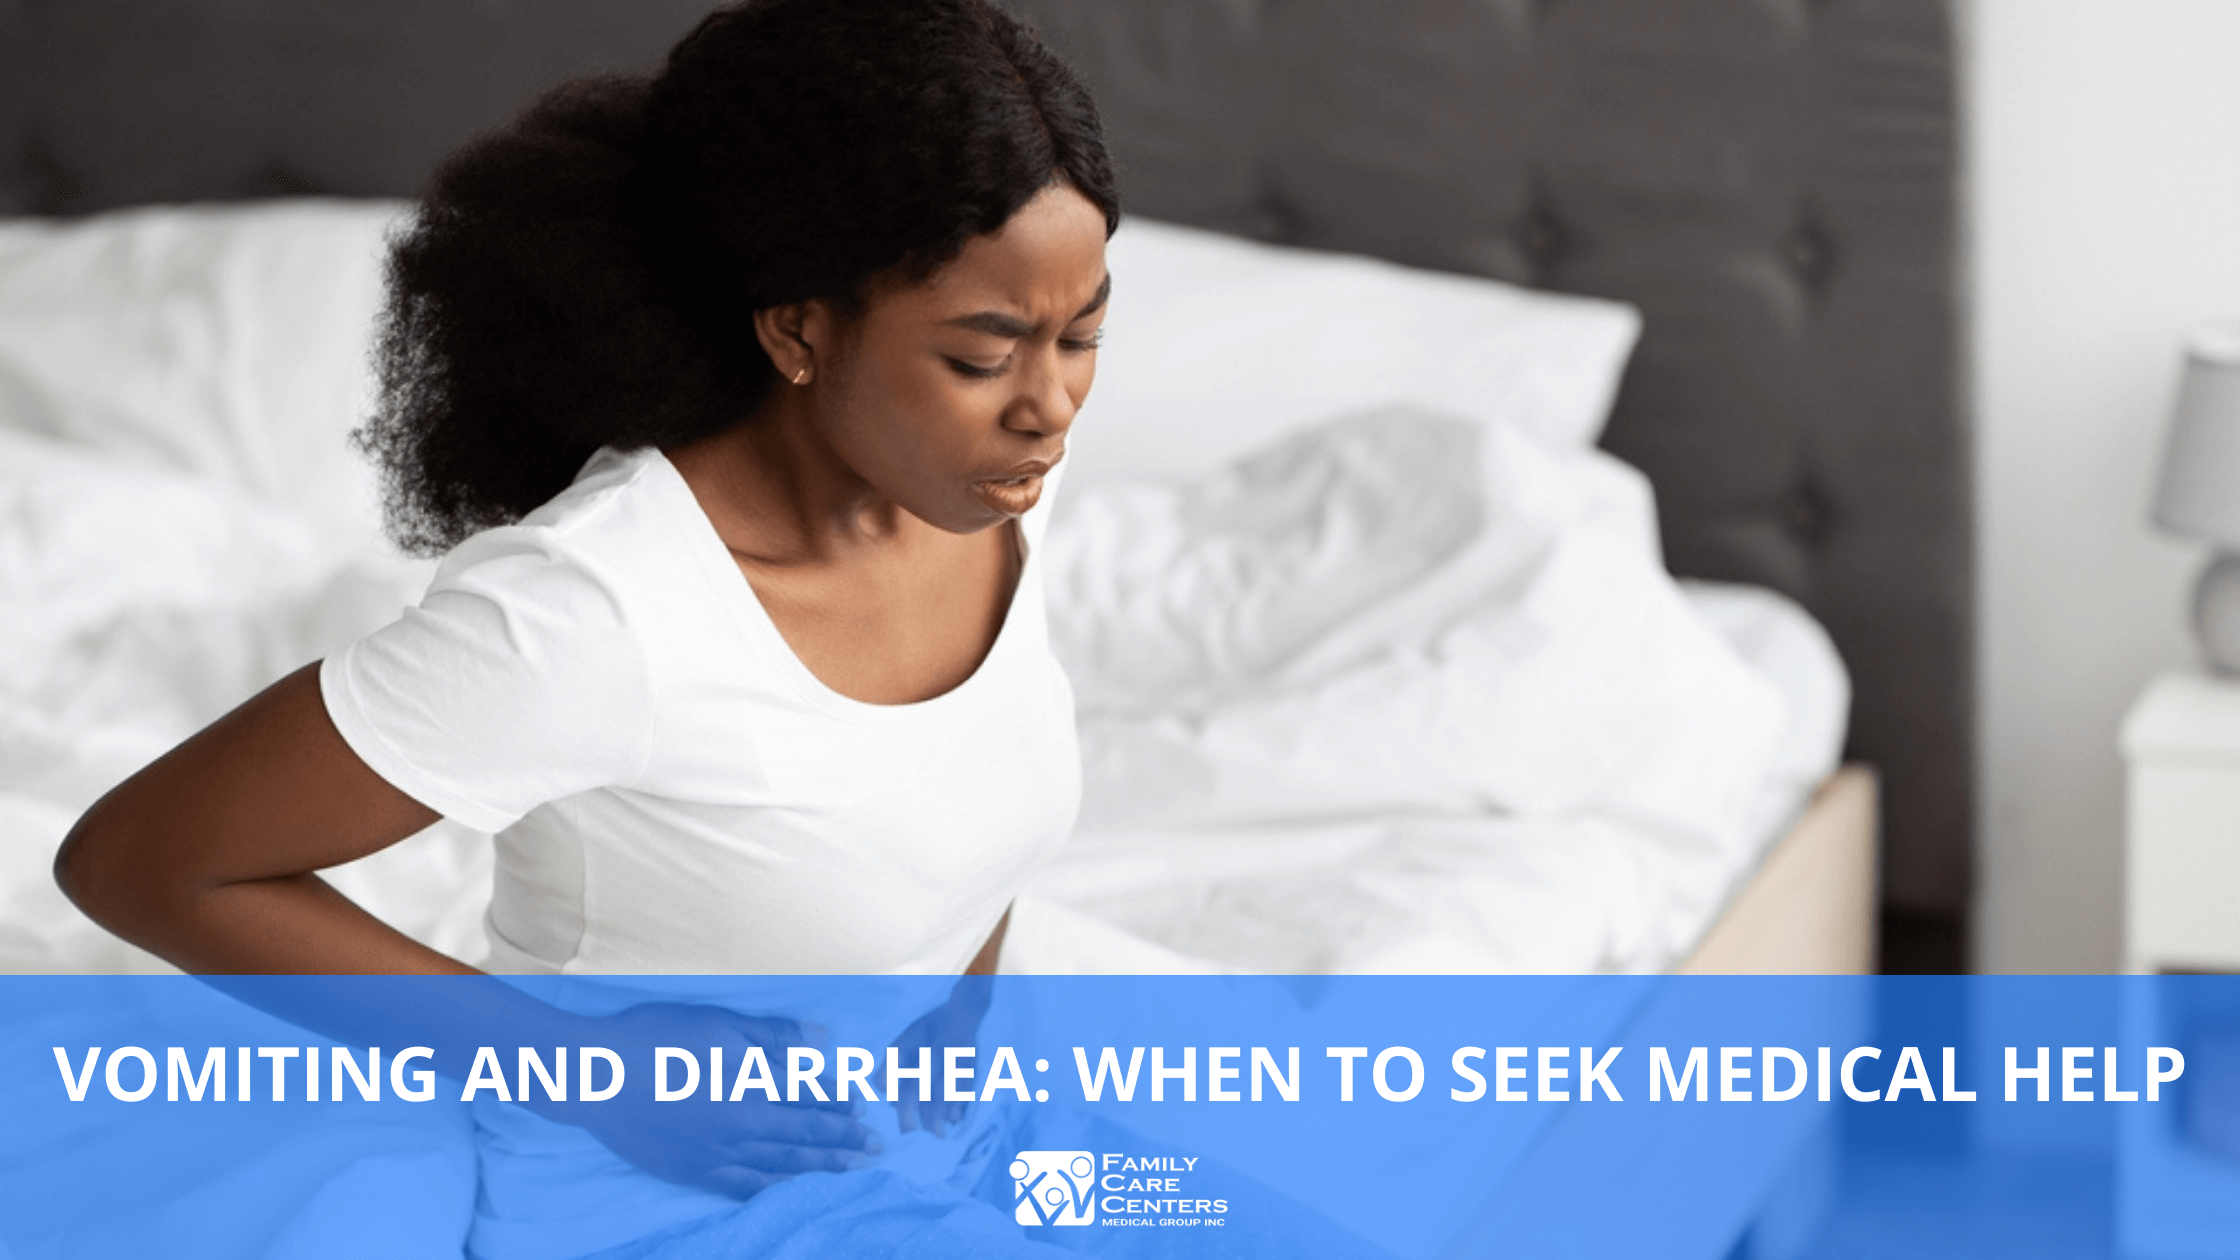 Vomiting and Diarrhea: When to Seek Medical Help